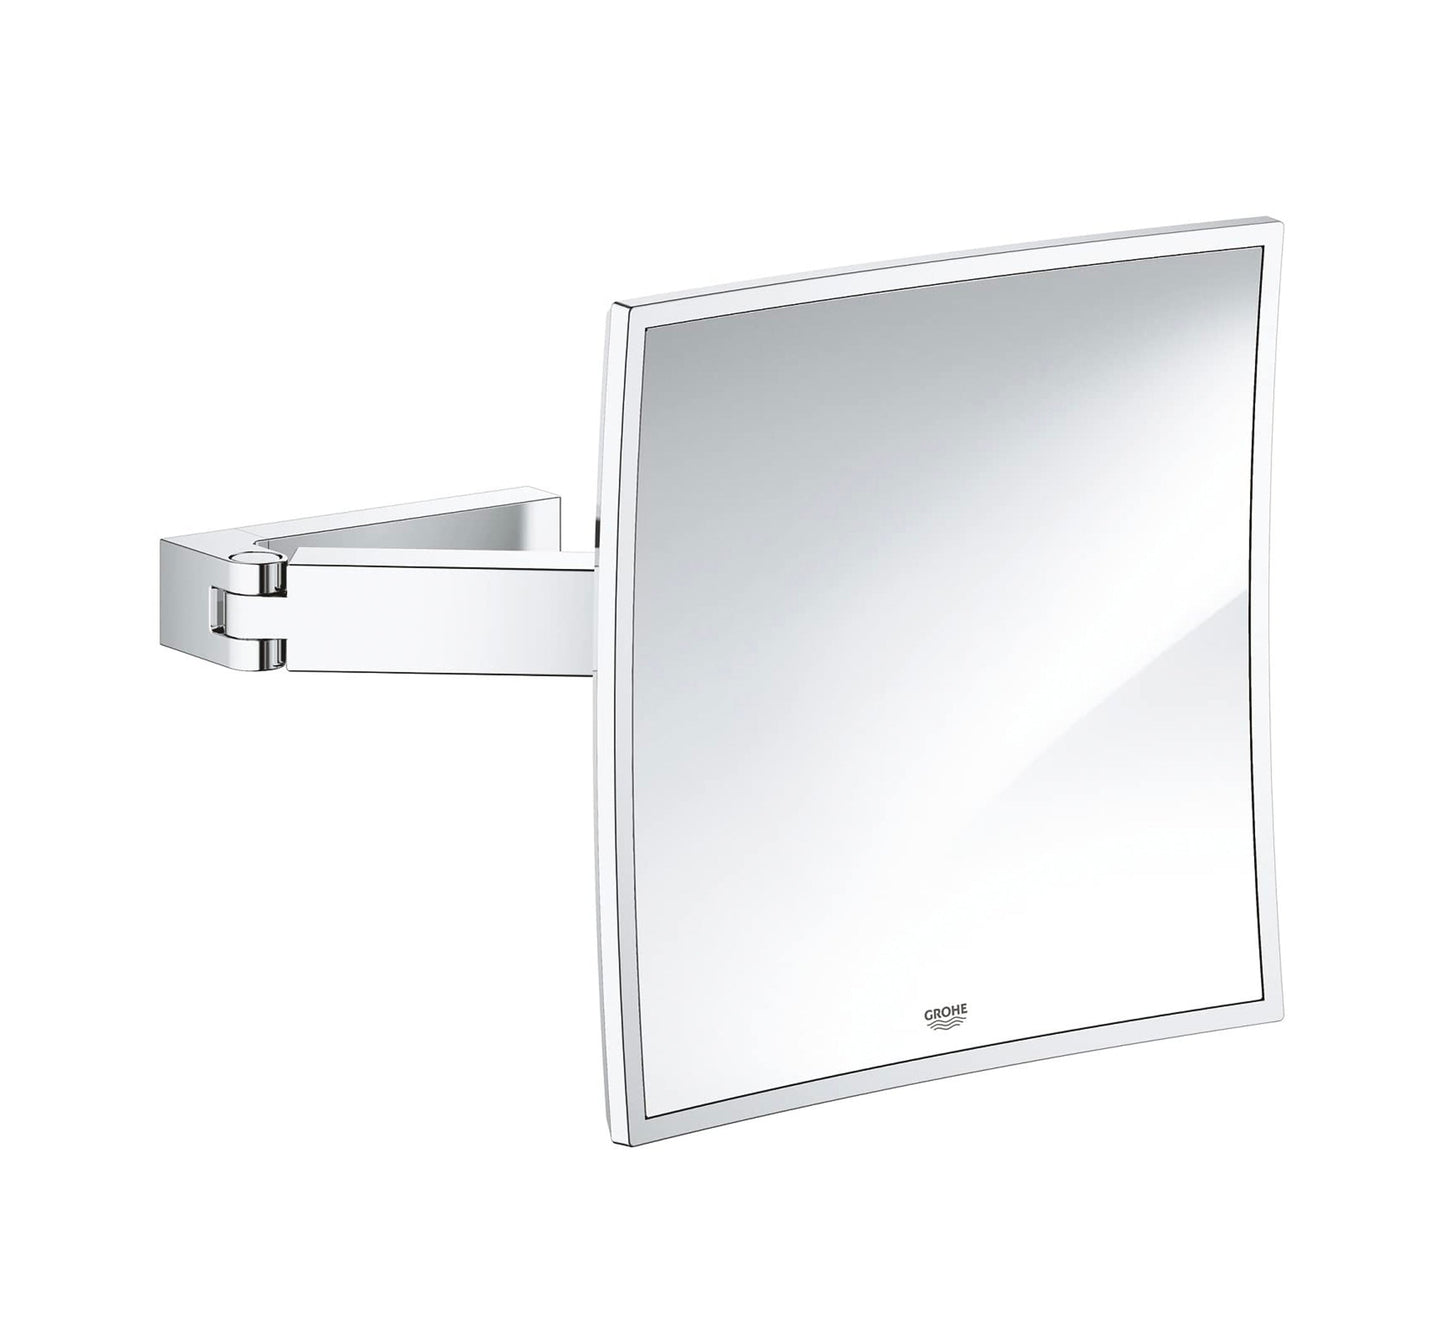 GROHE SELECTION CUBE COSMETIC MIRROR - 40808000